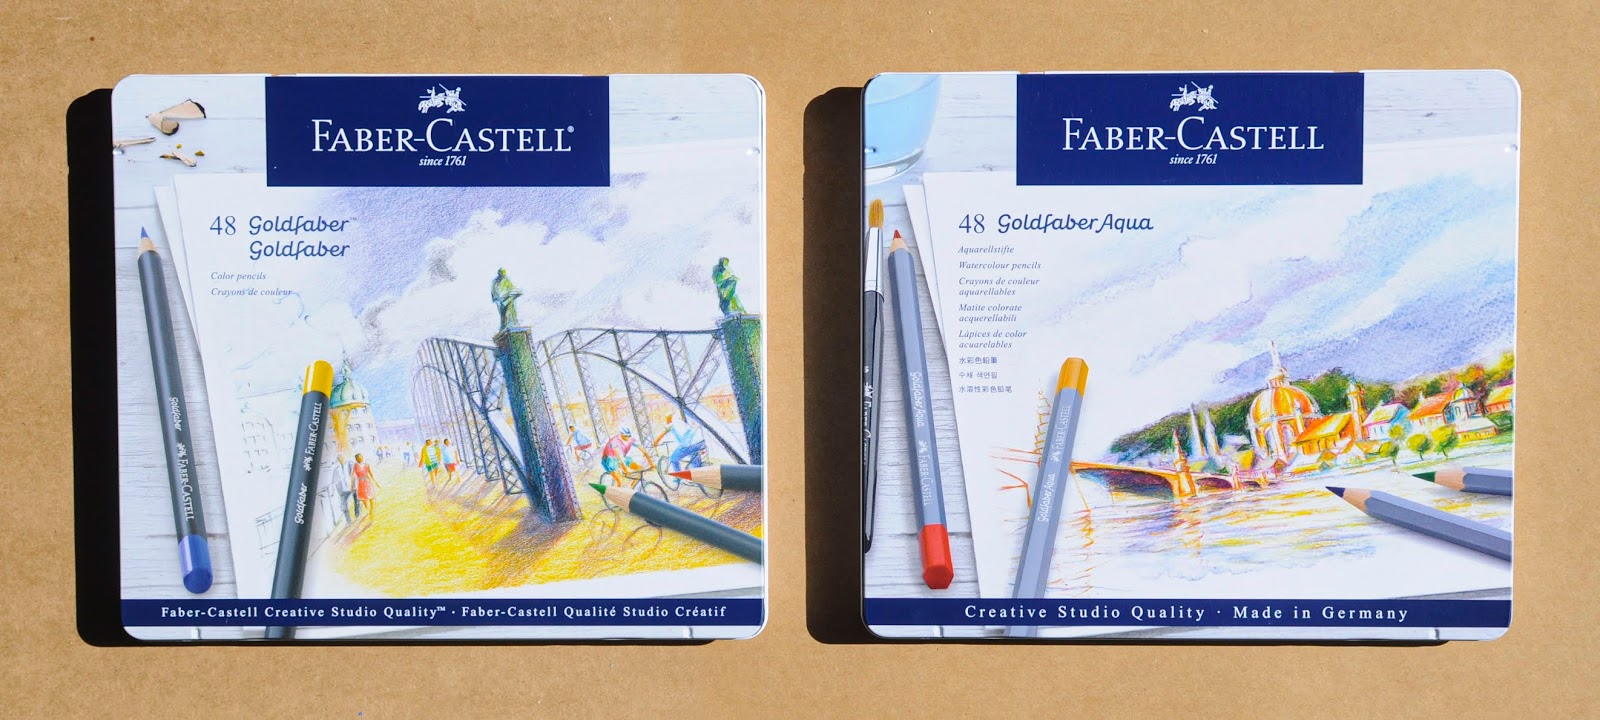 Faber-Castell 48 Goldfaber Regular And Aqua Colored Pencils Review | Jenny's Crayon Collection